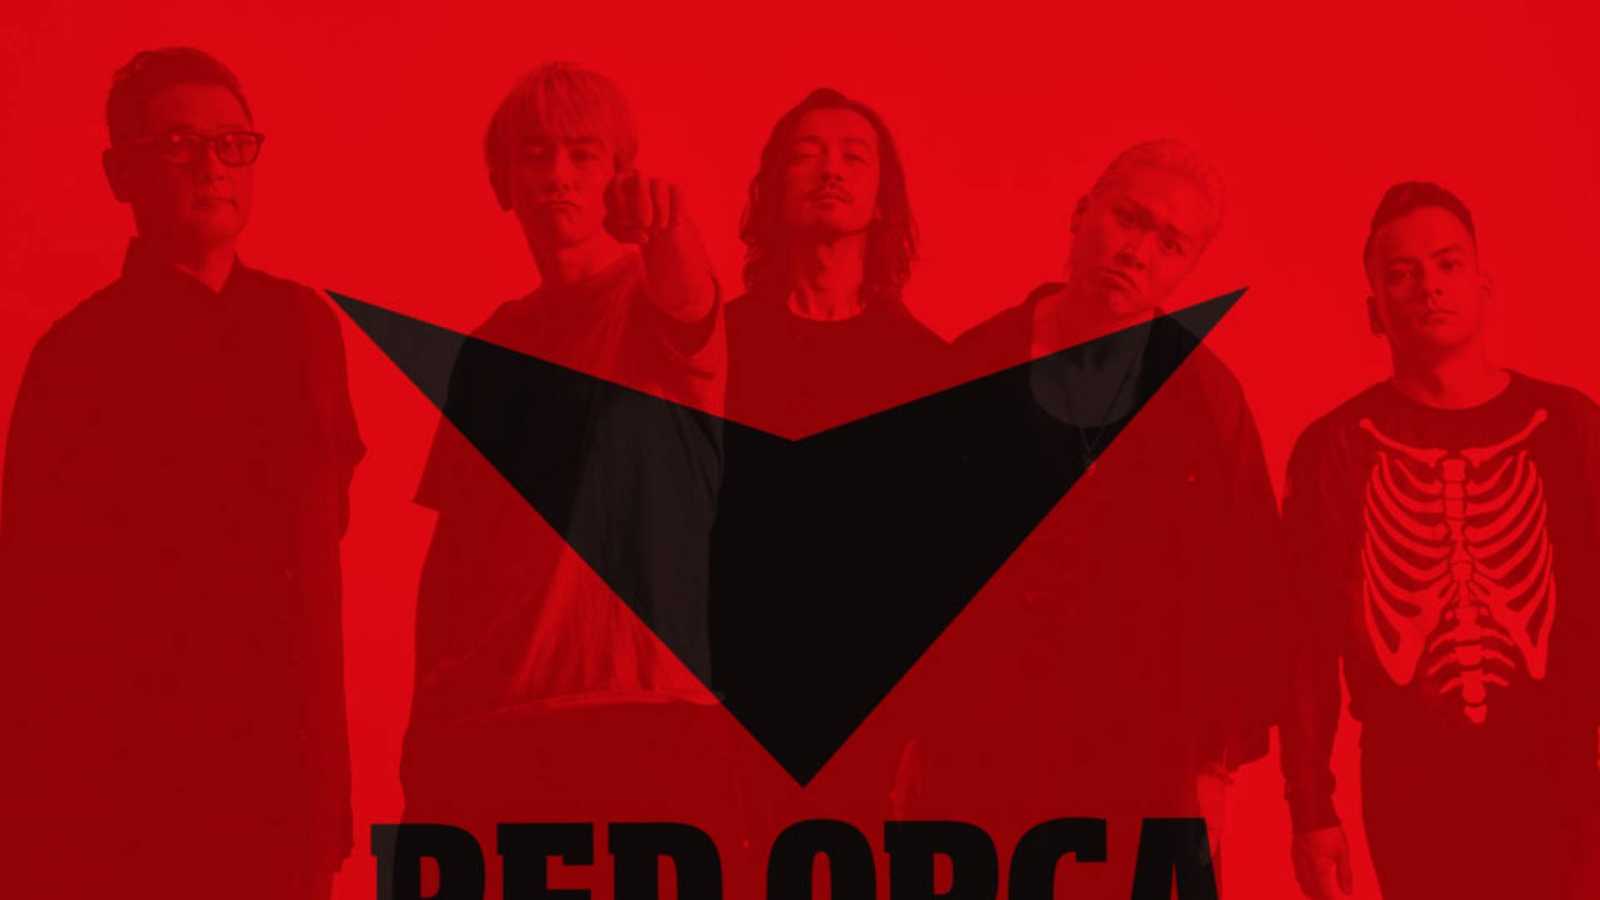 RED ORCA sort son premier album © RED ORCA. All rights reserved.